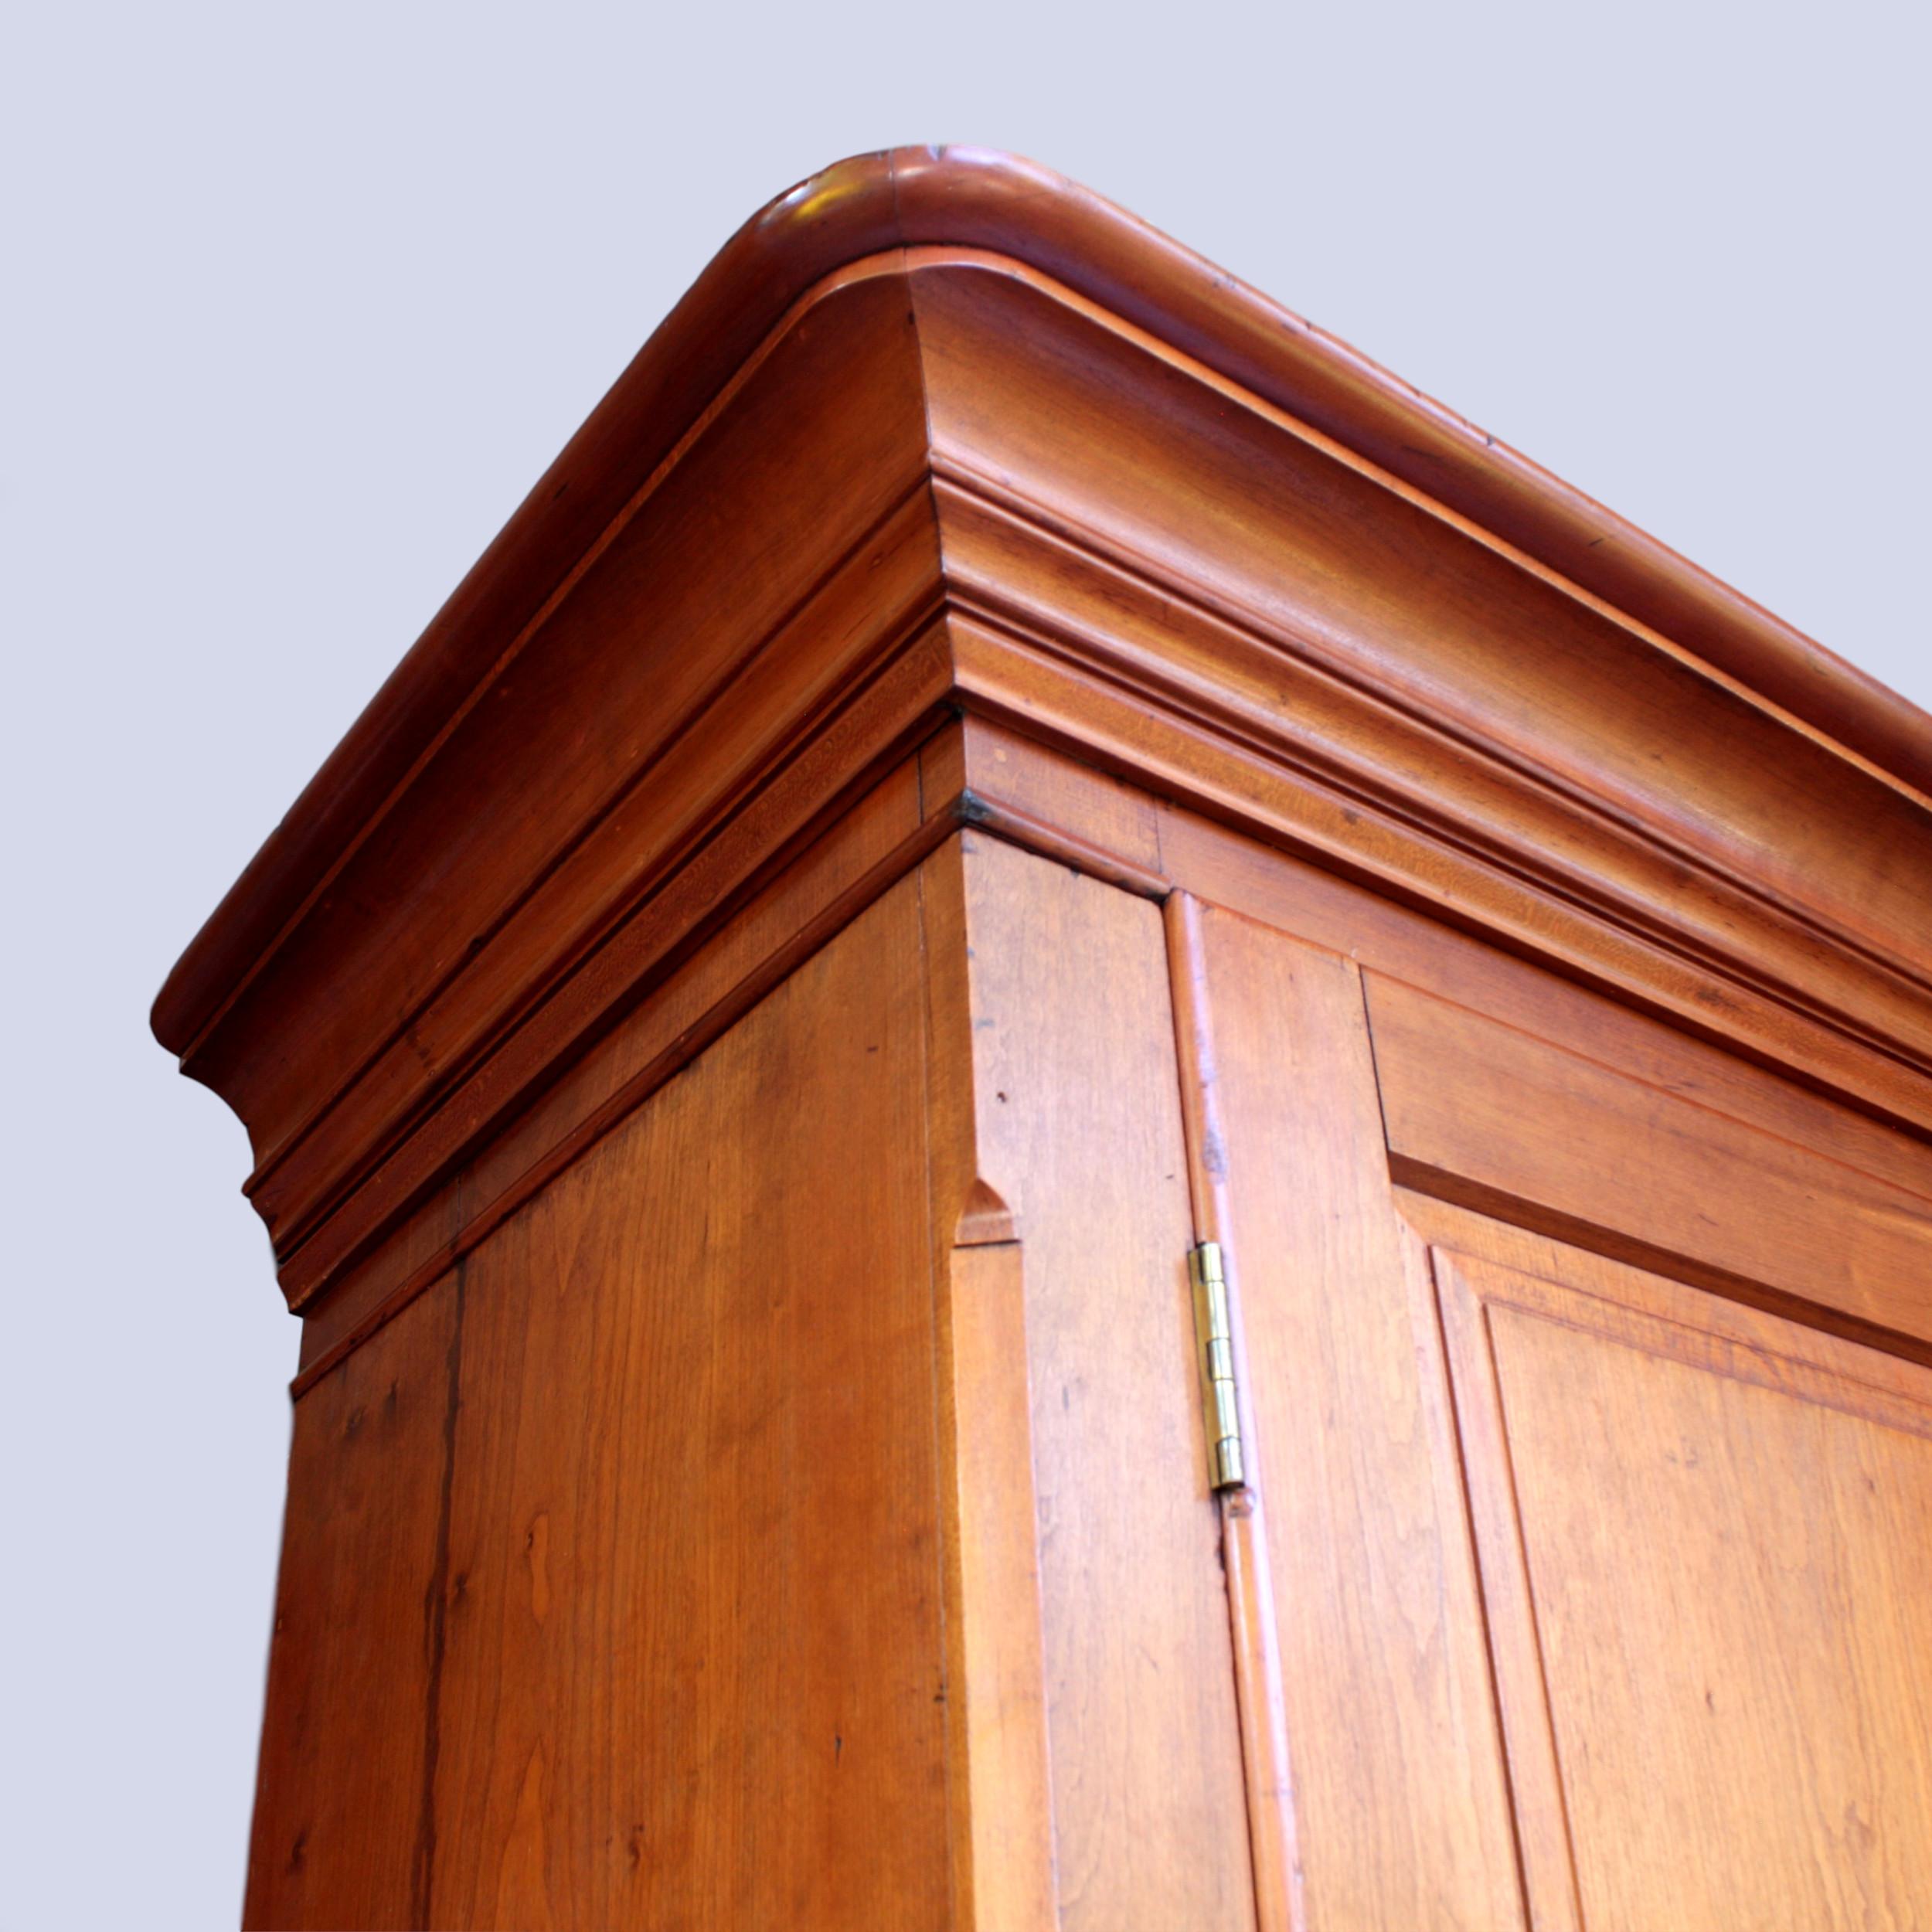 Carved Late 19th Century Neoclassical Primitive Wardrobe Armoire in Solid Cherry